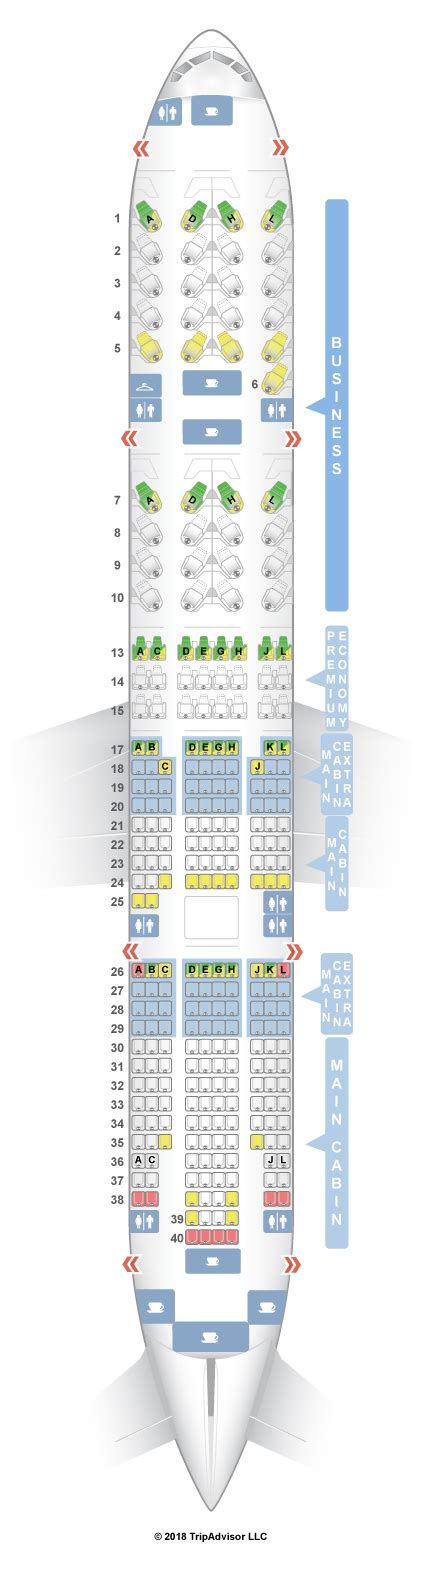 boeing 777 american airlines seat map